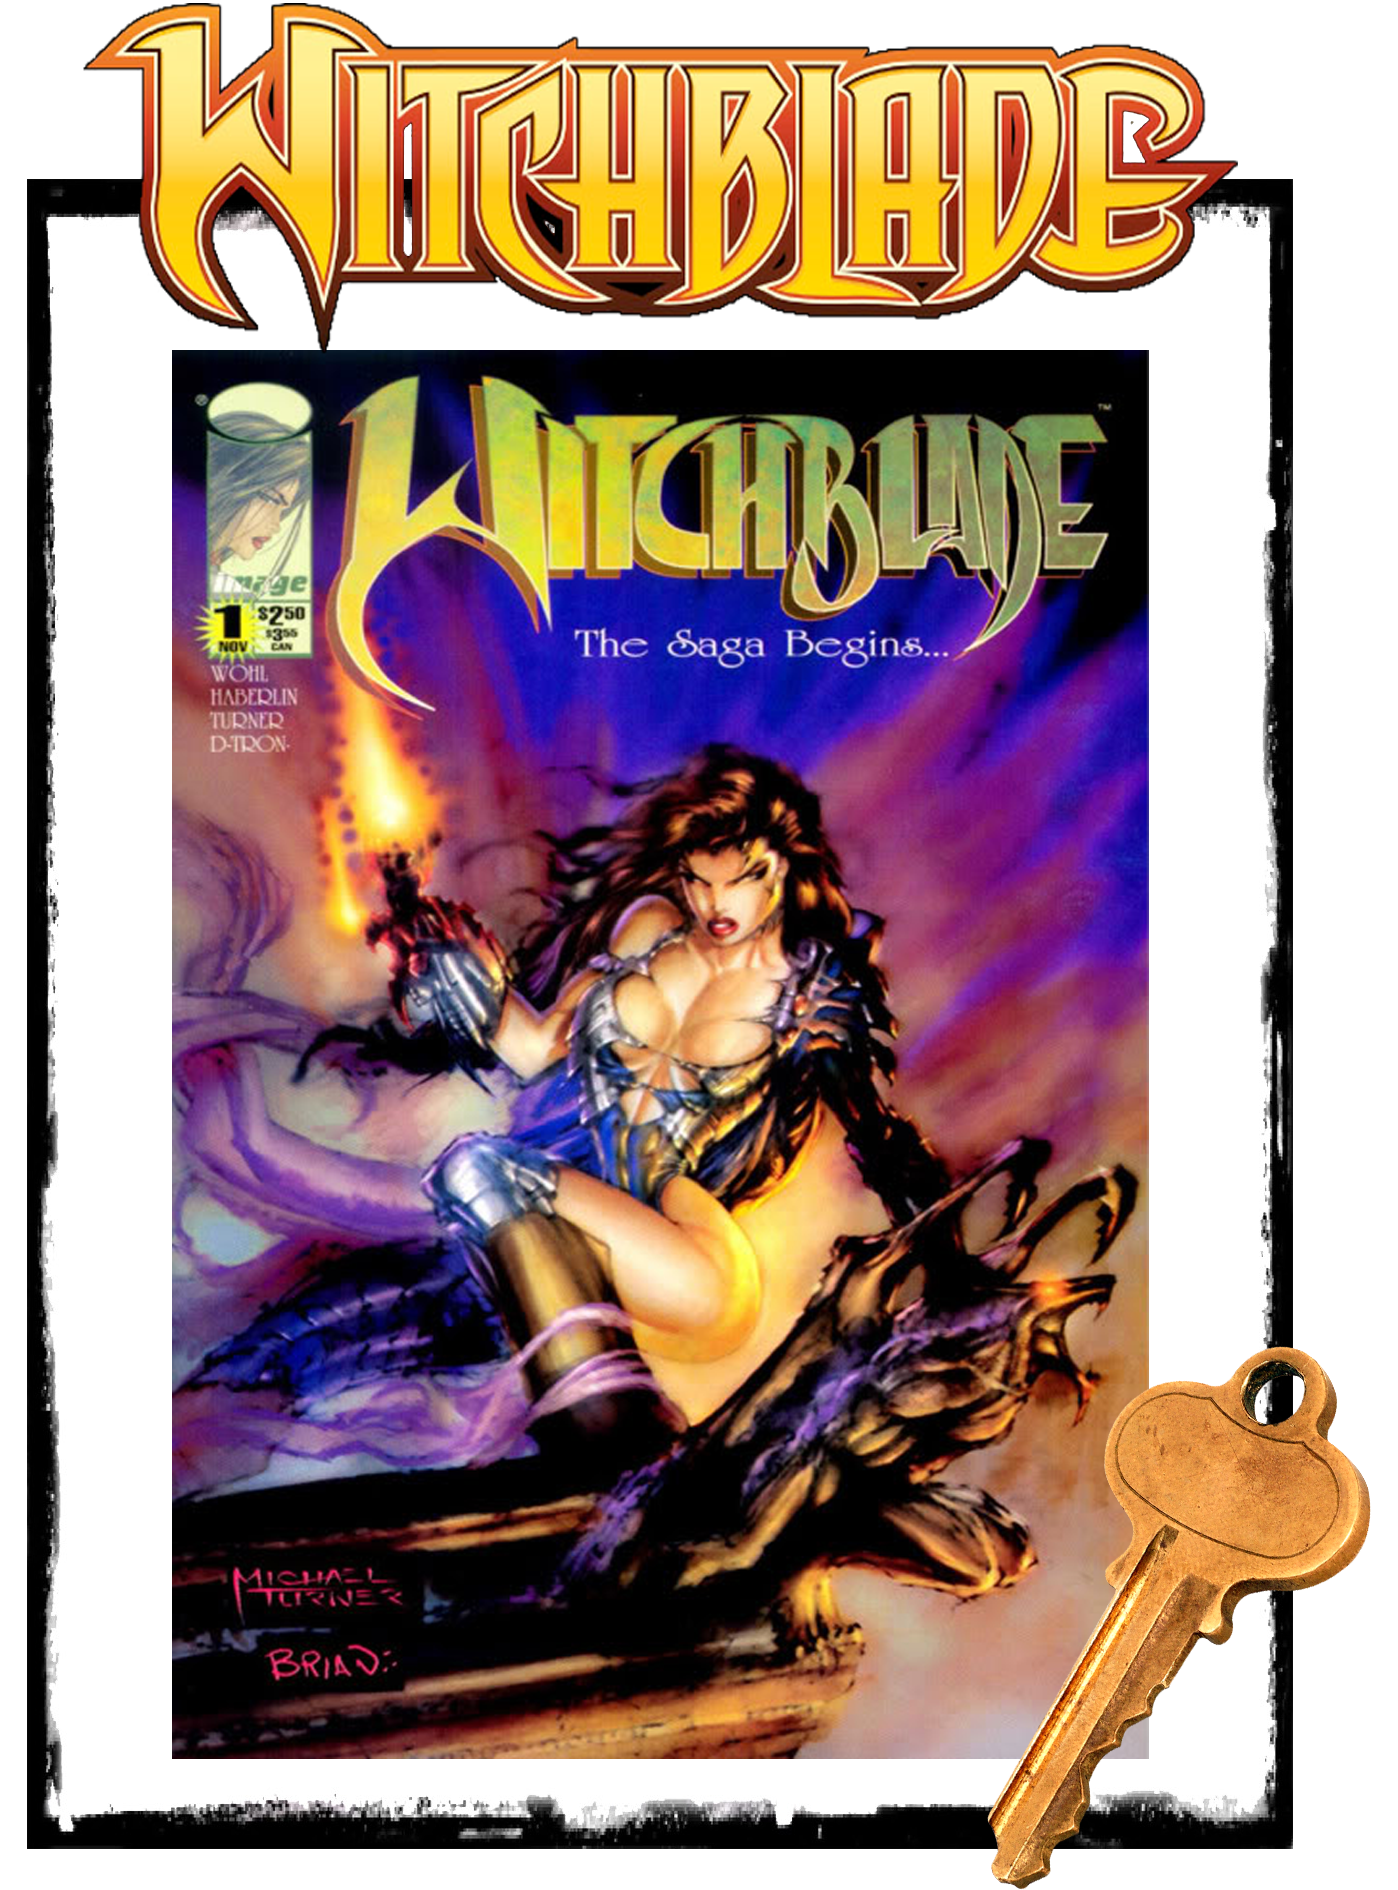 WITCHBLADE - #1 (1995 - CONDITION VF+/NM-)